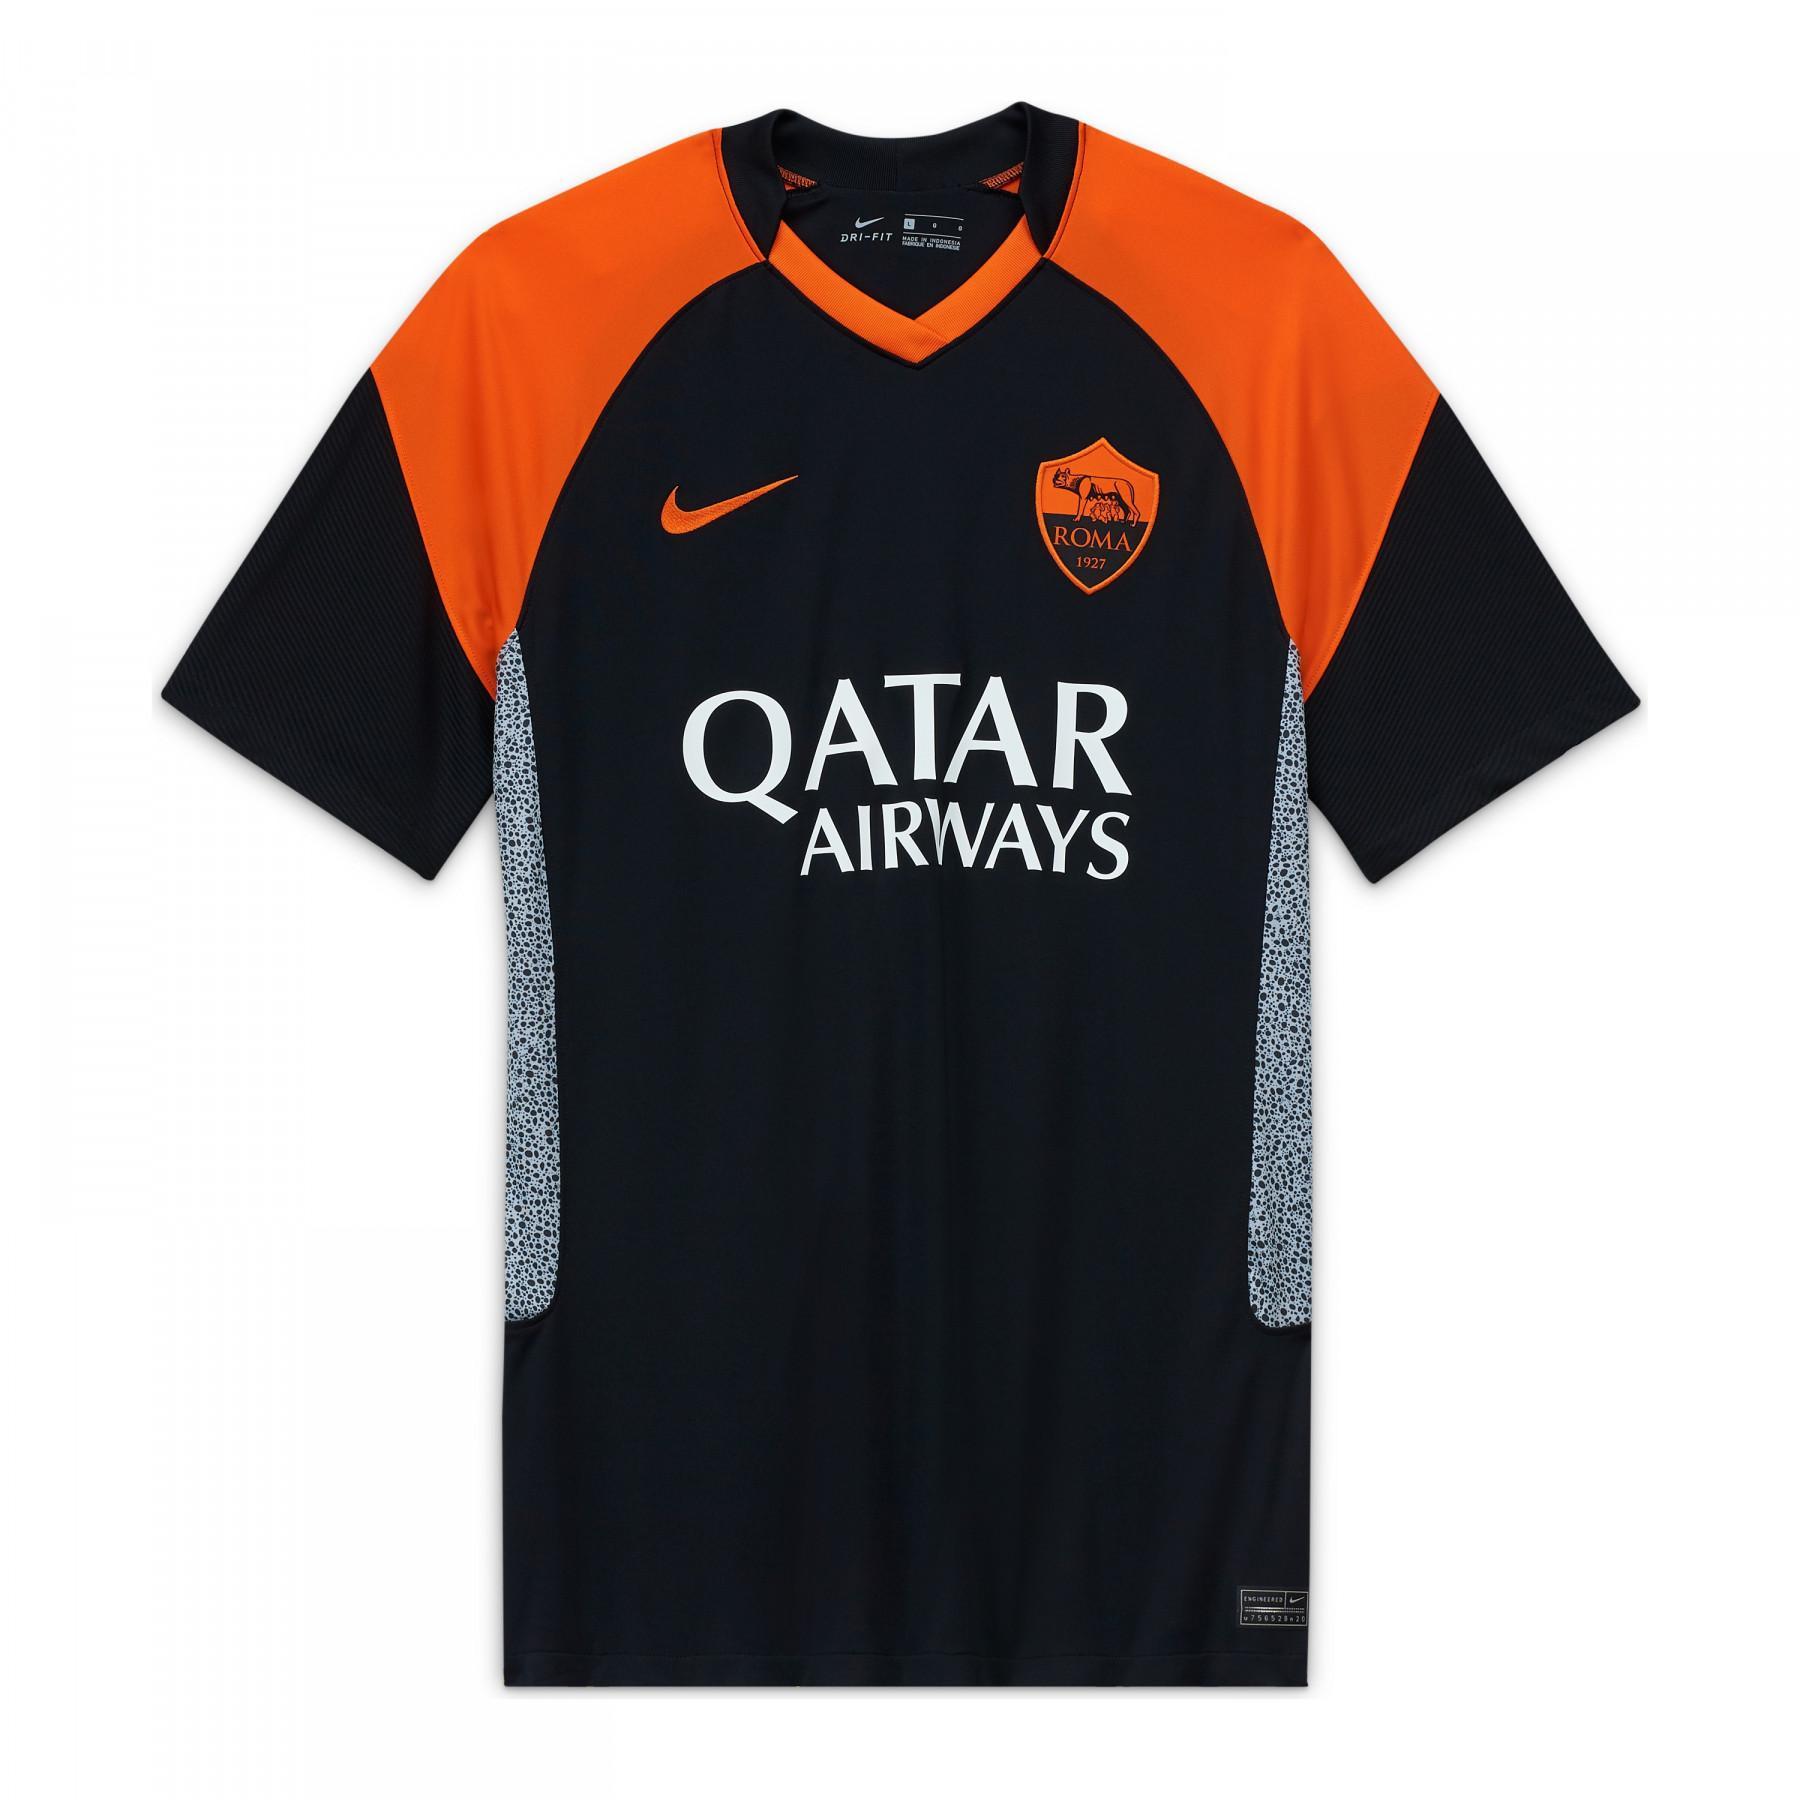 3rd jersey AS Roma 2020/21